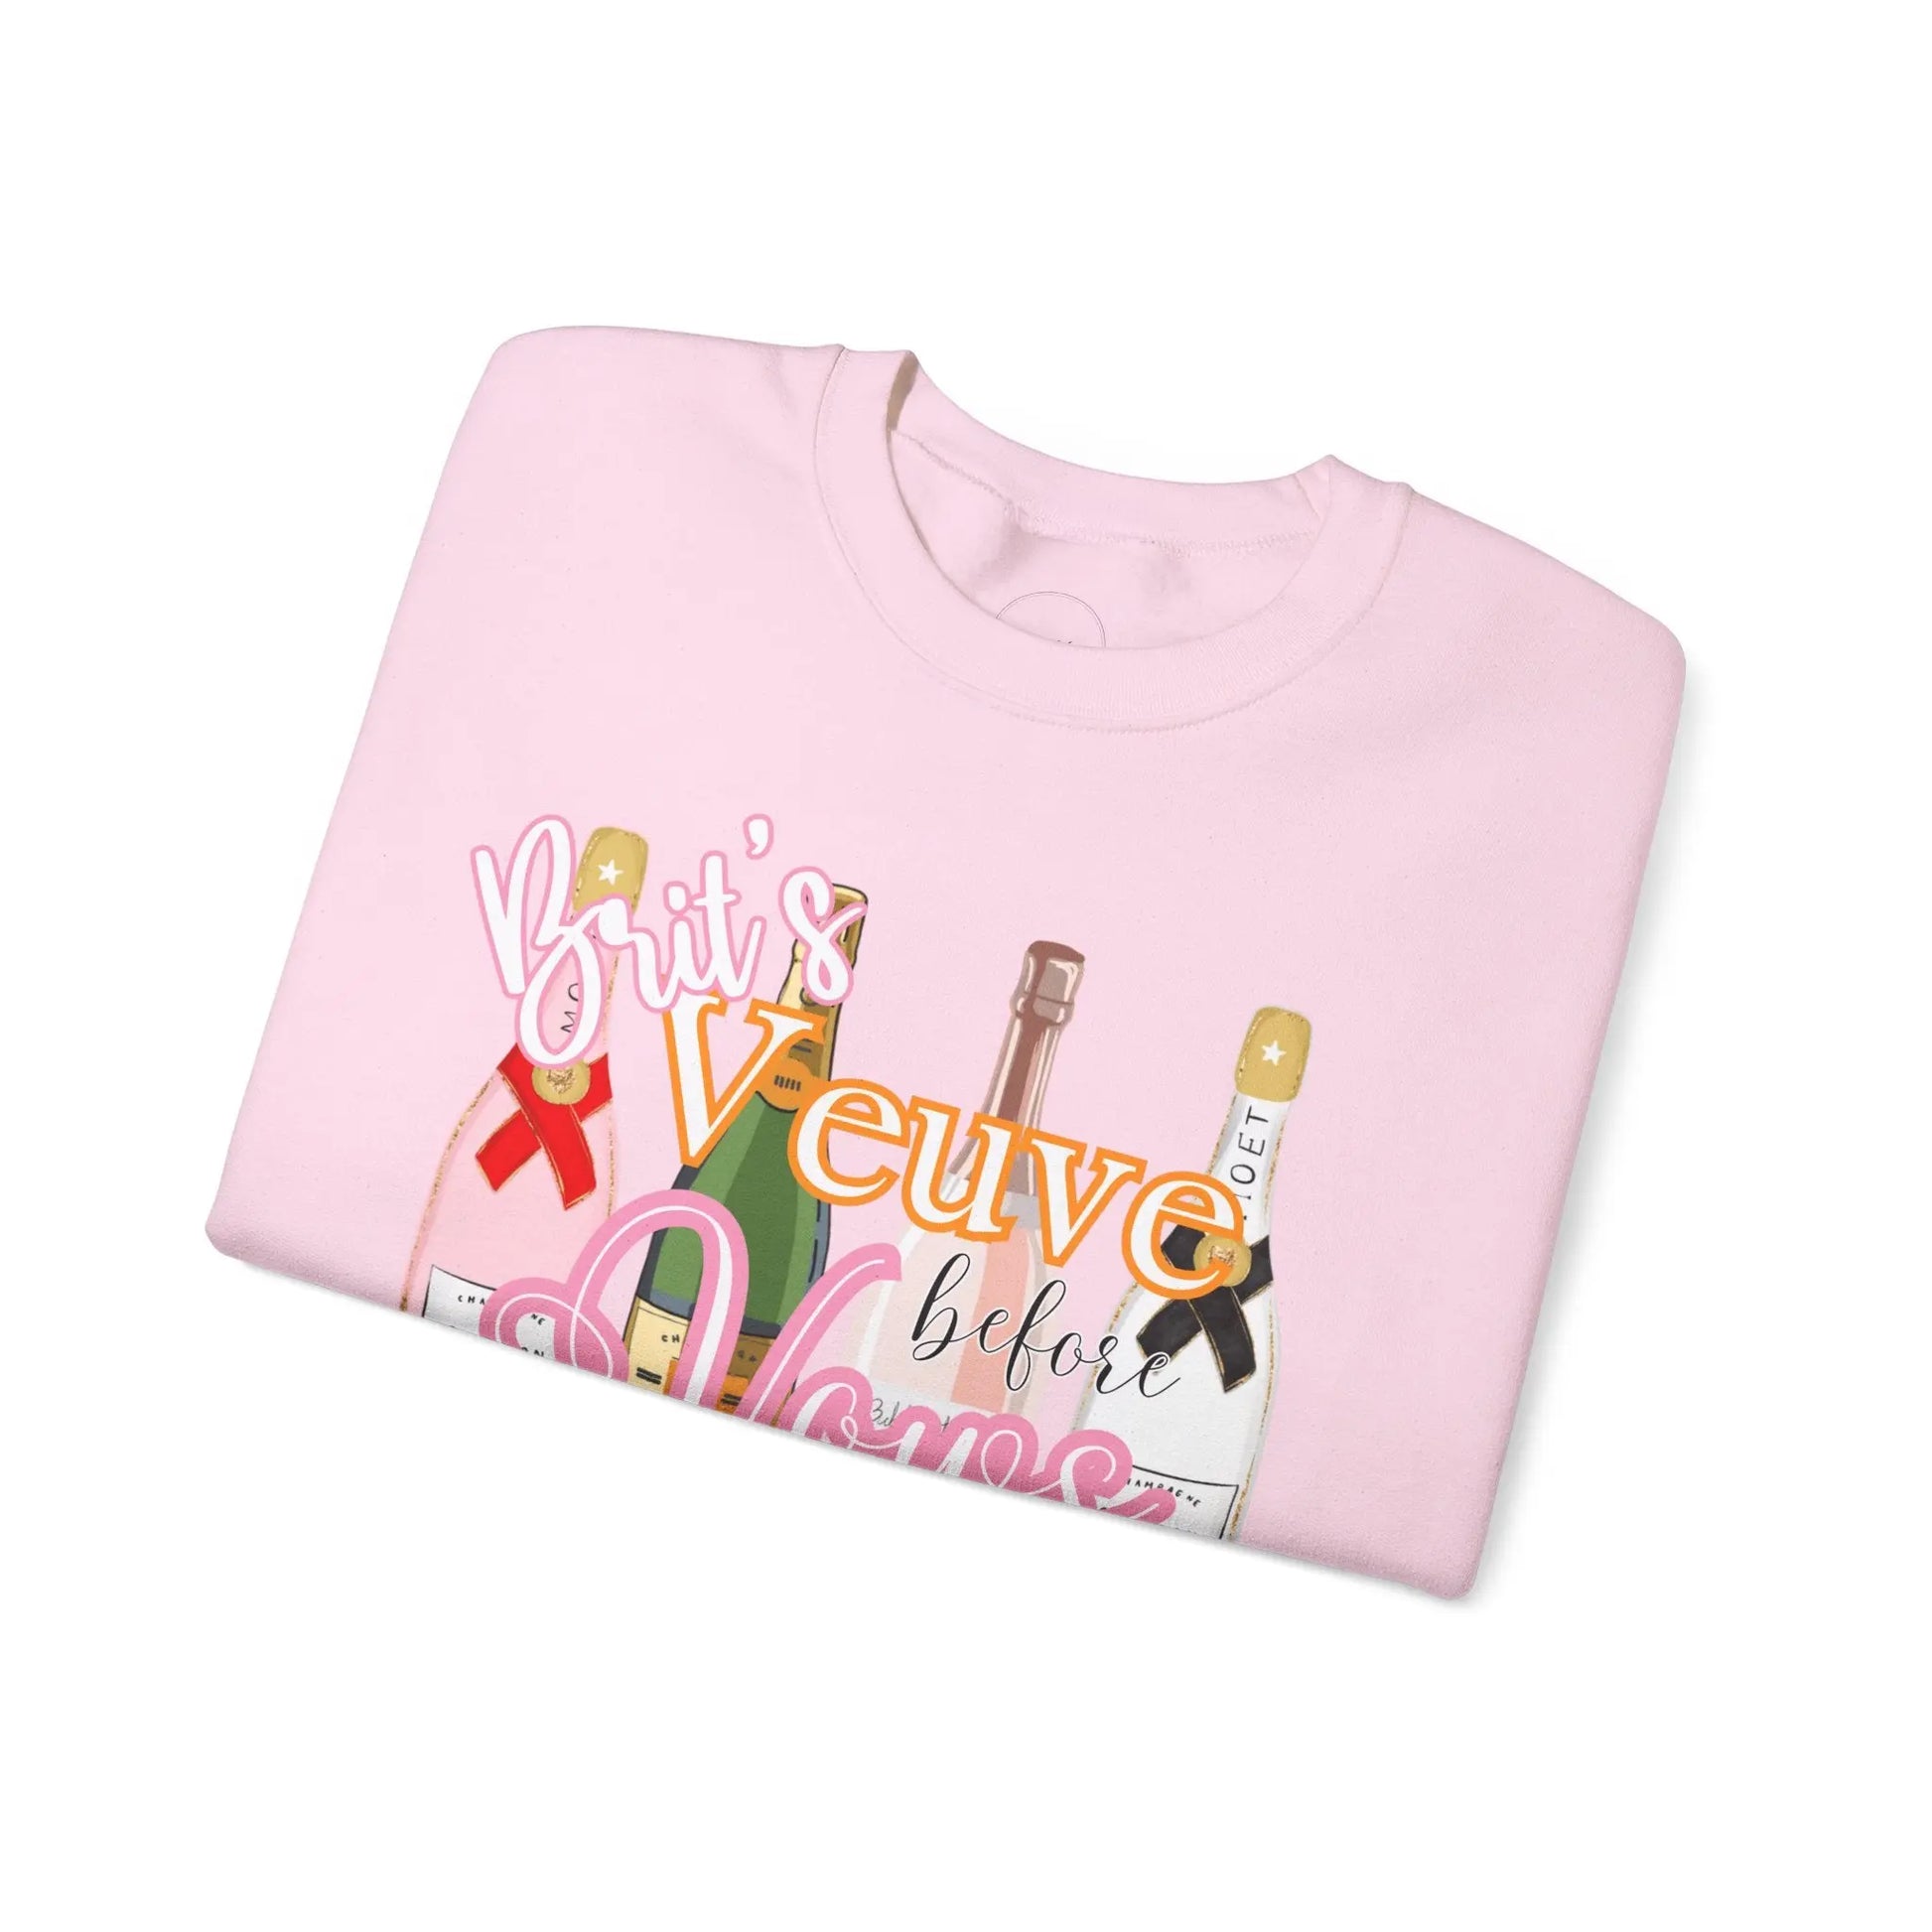 Veuve Before Vows Personalized MOH Sweatshirt Printify